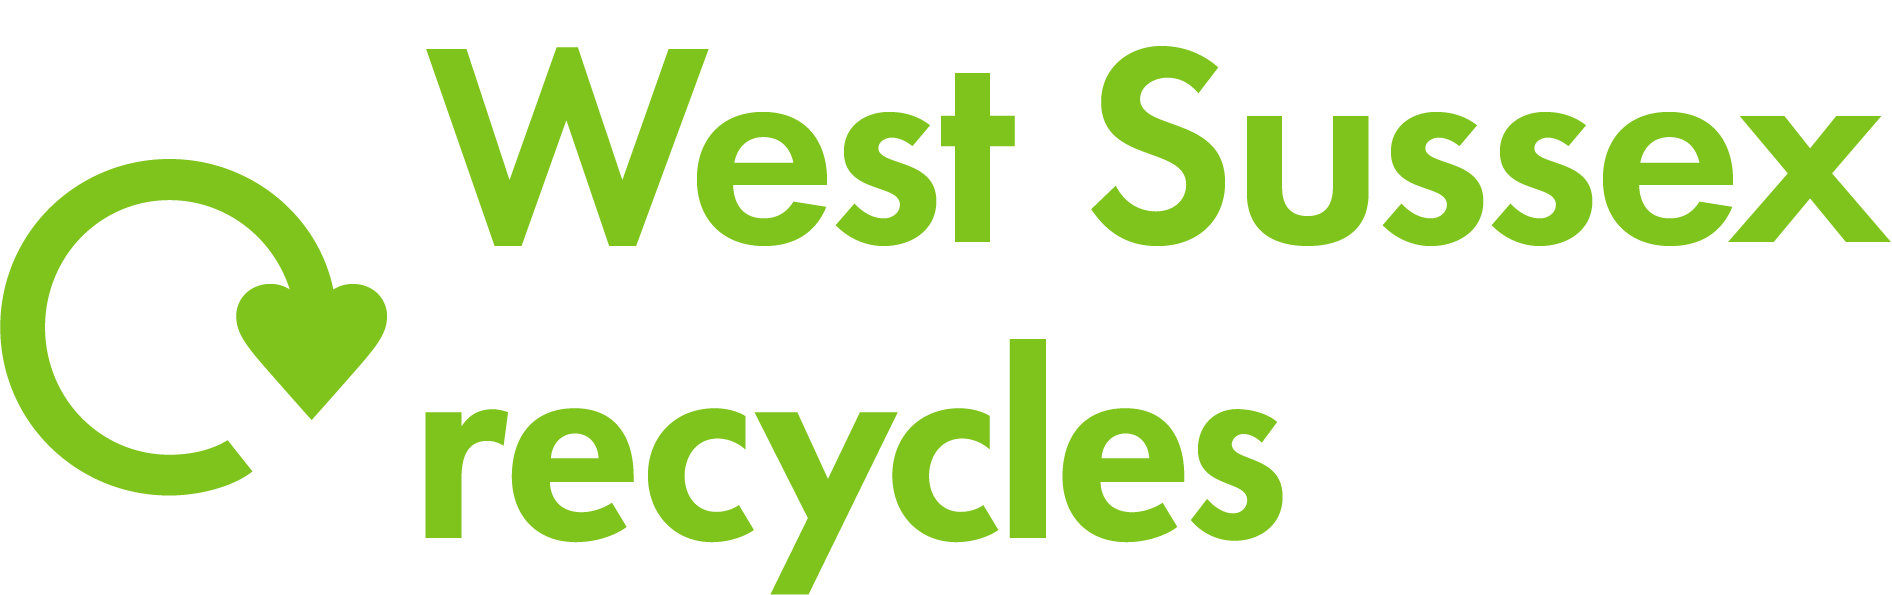 WestSussex_Recycles_stacked.png